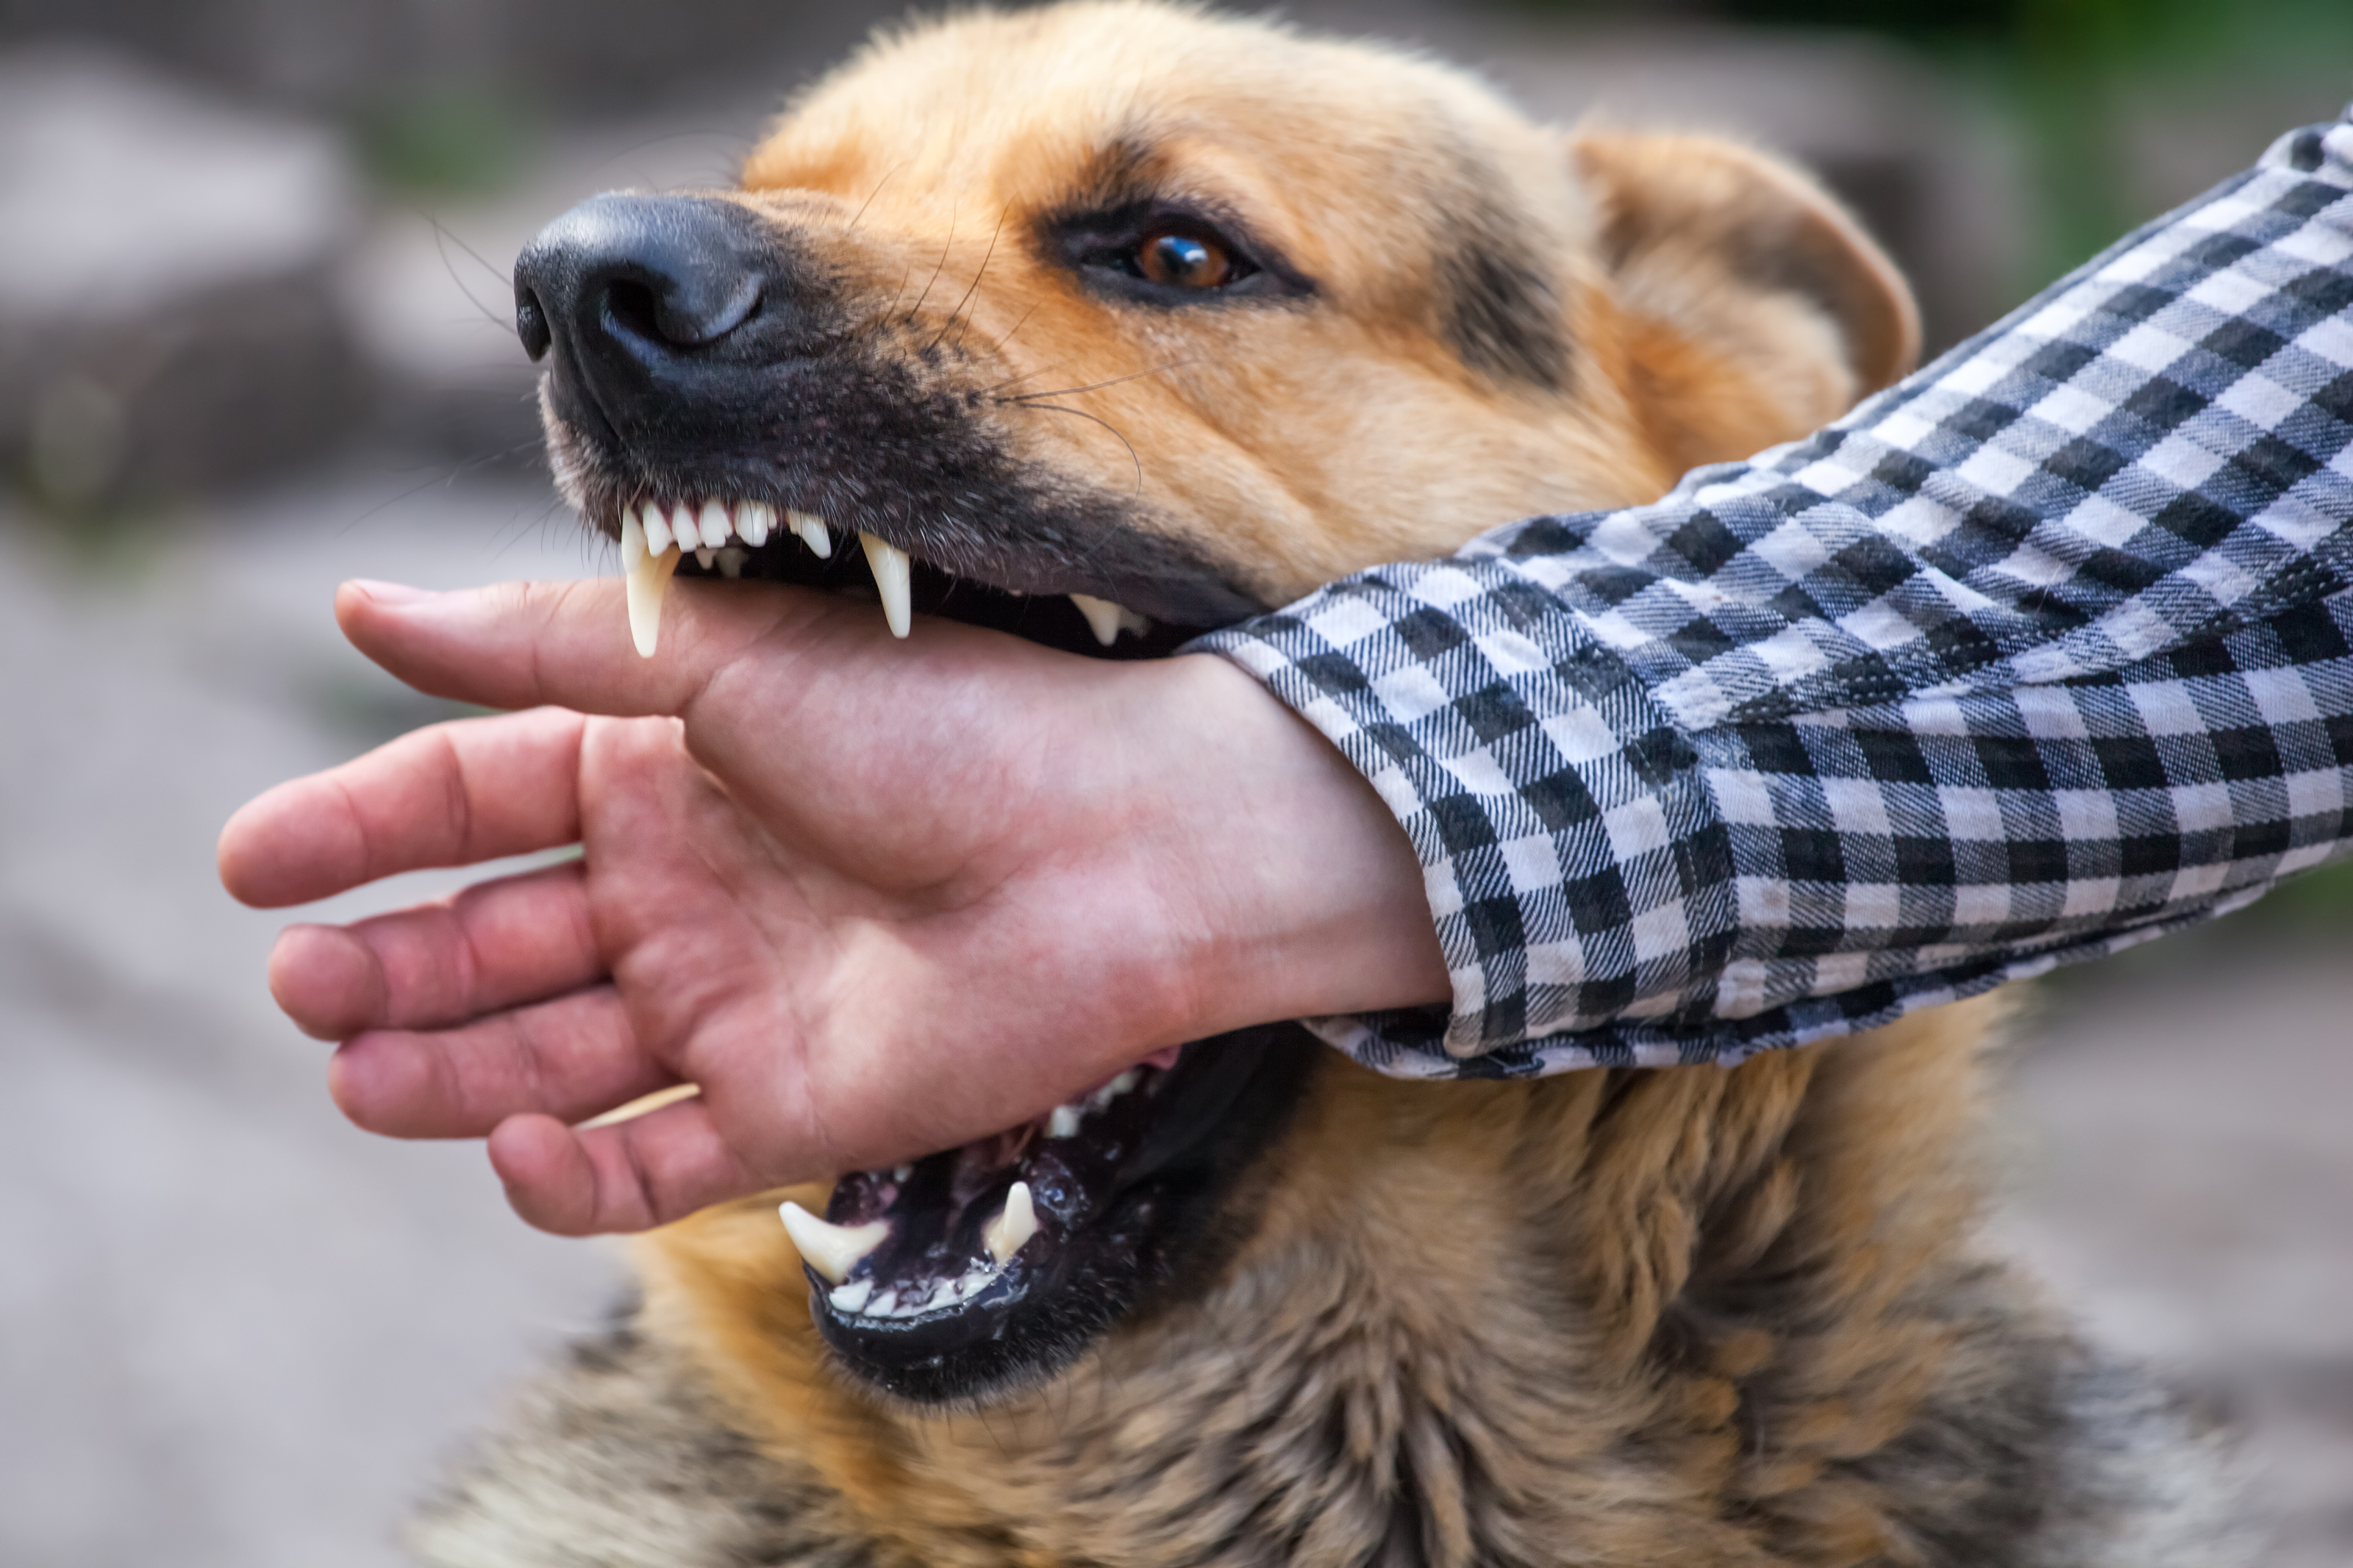 Common Injuries Sustained From a Dog Attack